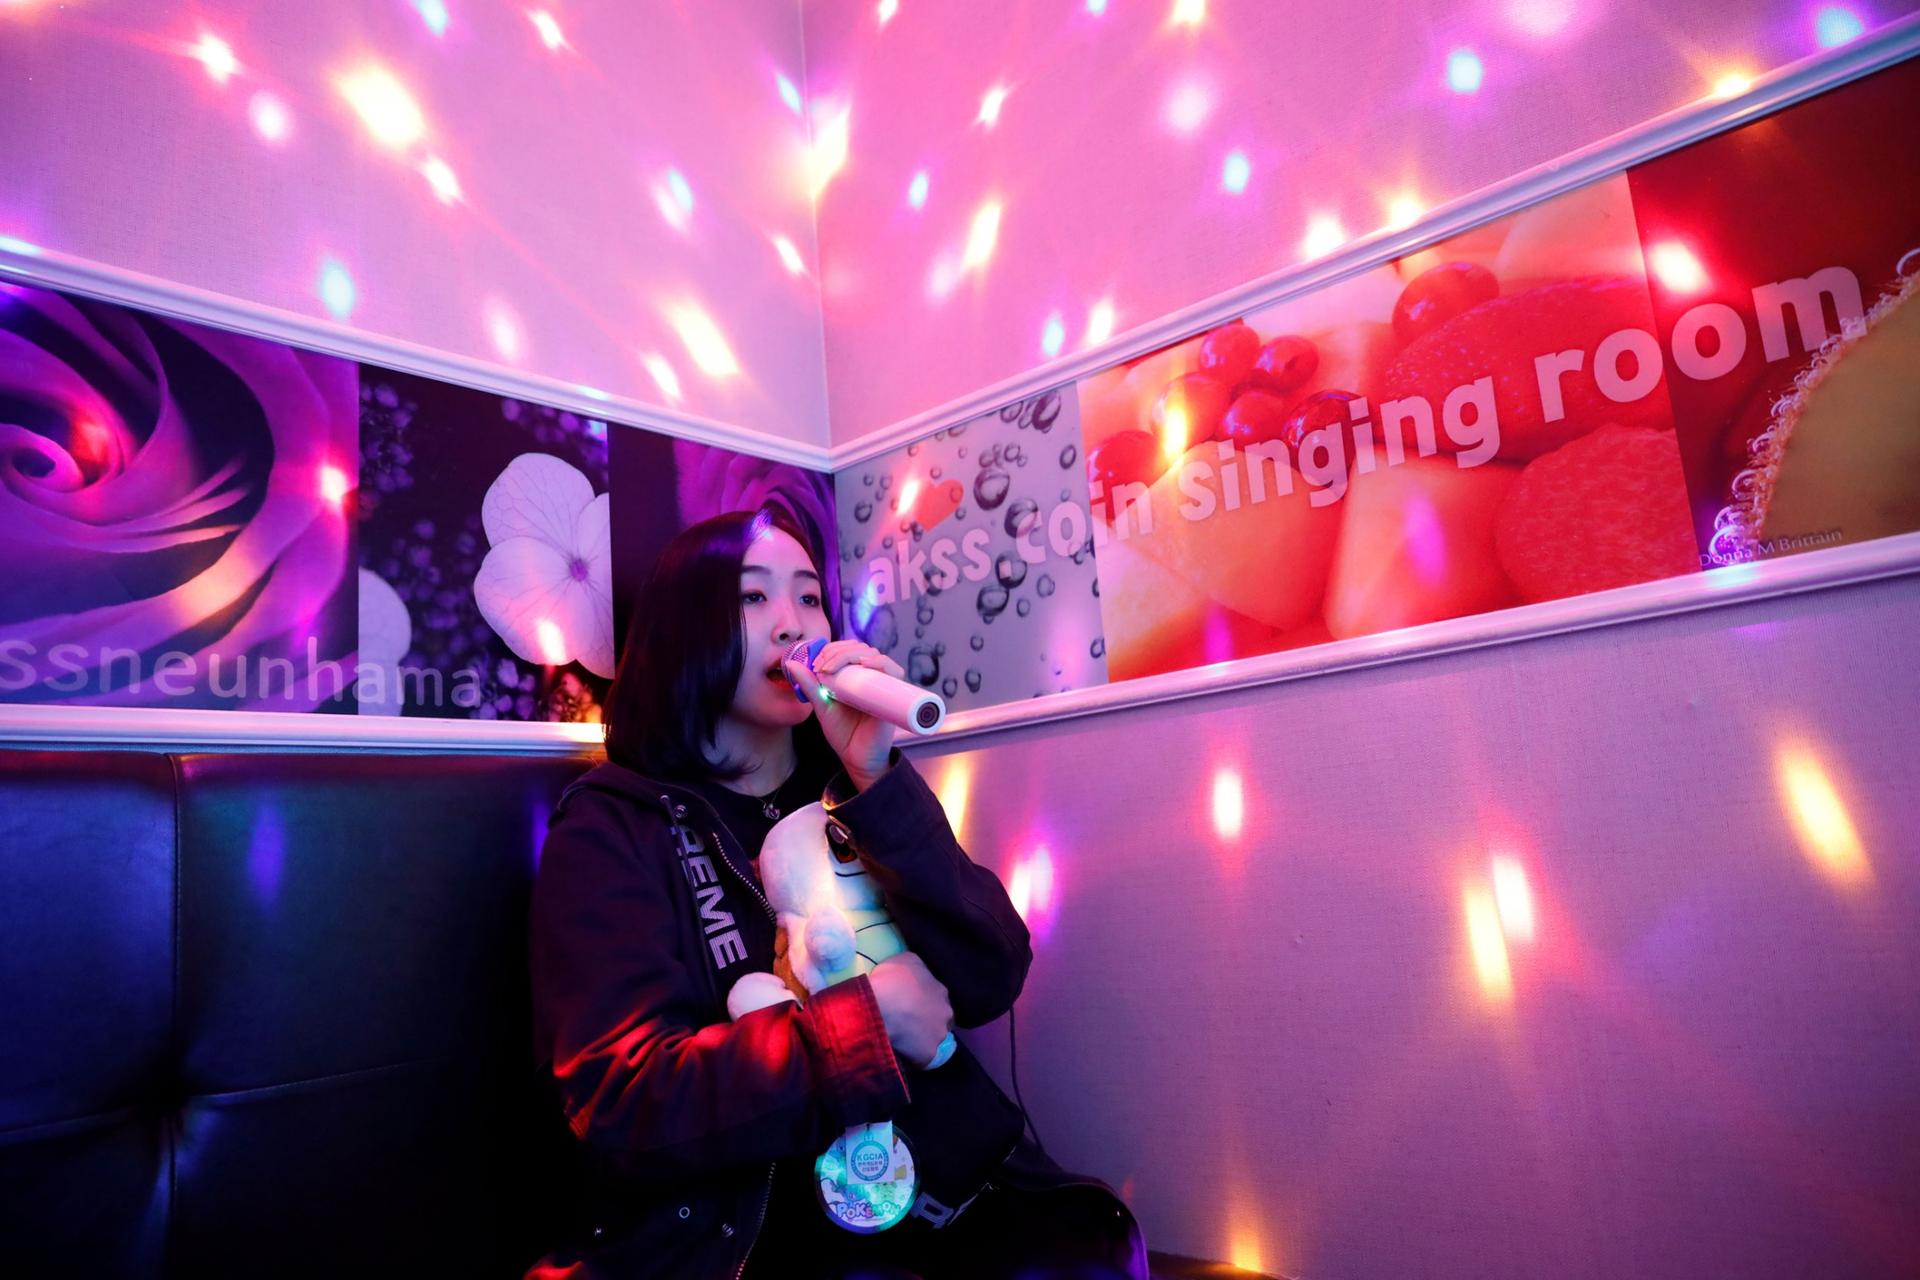 A woman is shown singing into a microphone with pink lights on the walls.